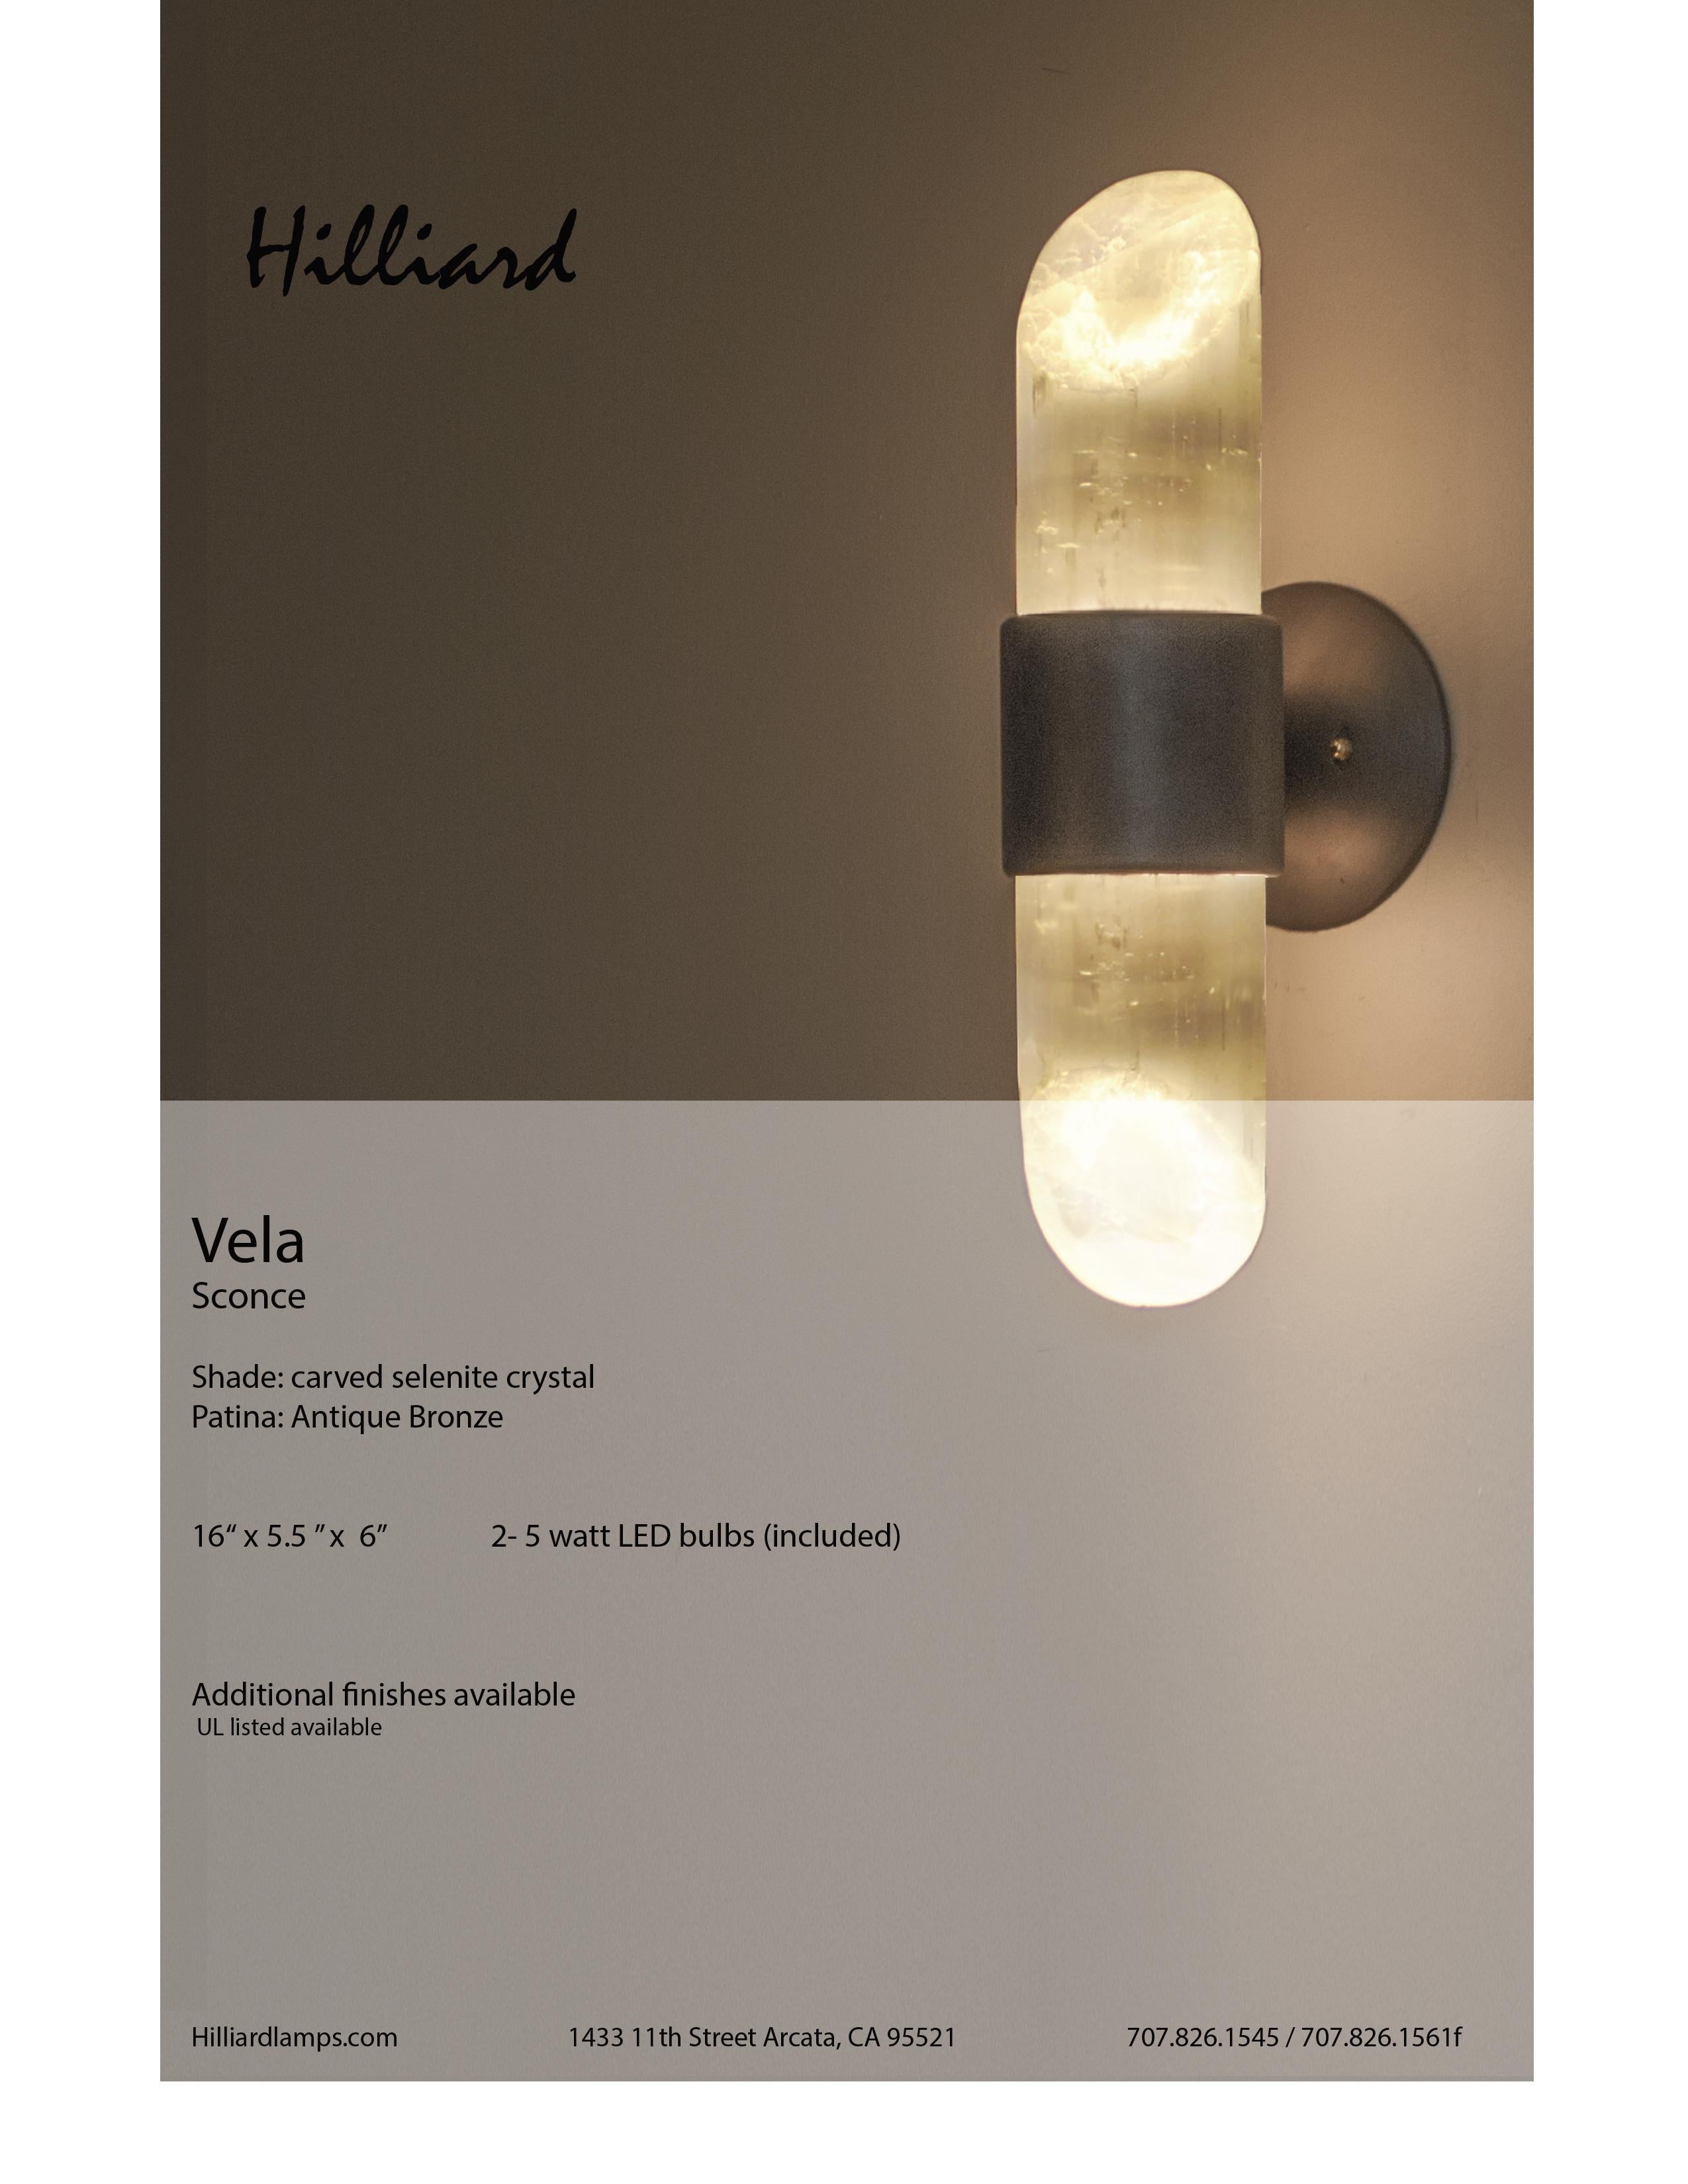 The Vela sconce is part of our hand carved LED Crystal Collection.
Featuring polished selenite that has that special reflective glow and a sand cast bronze frame
Designed by Samuel Hilliard 2016
Measures: 16“ x 5.5 ”x 6”
2- 5 watt LED bulbs